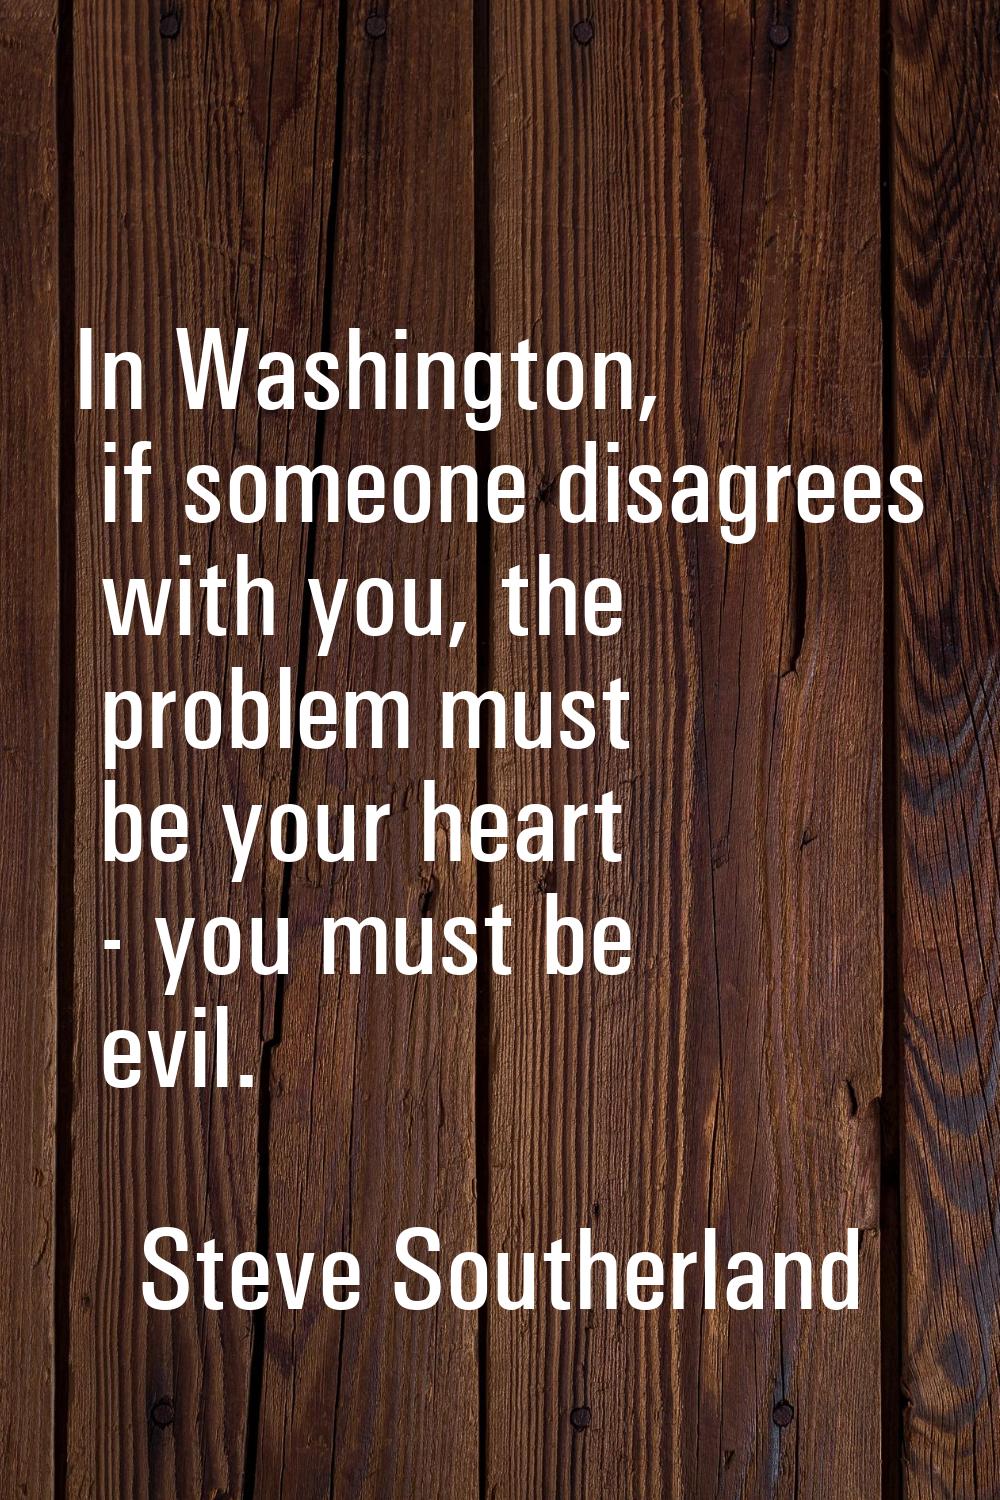 In Washington, if someone disagrees with you, the problem must be your heart - you must be evil.